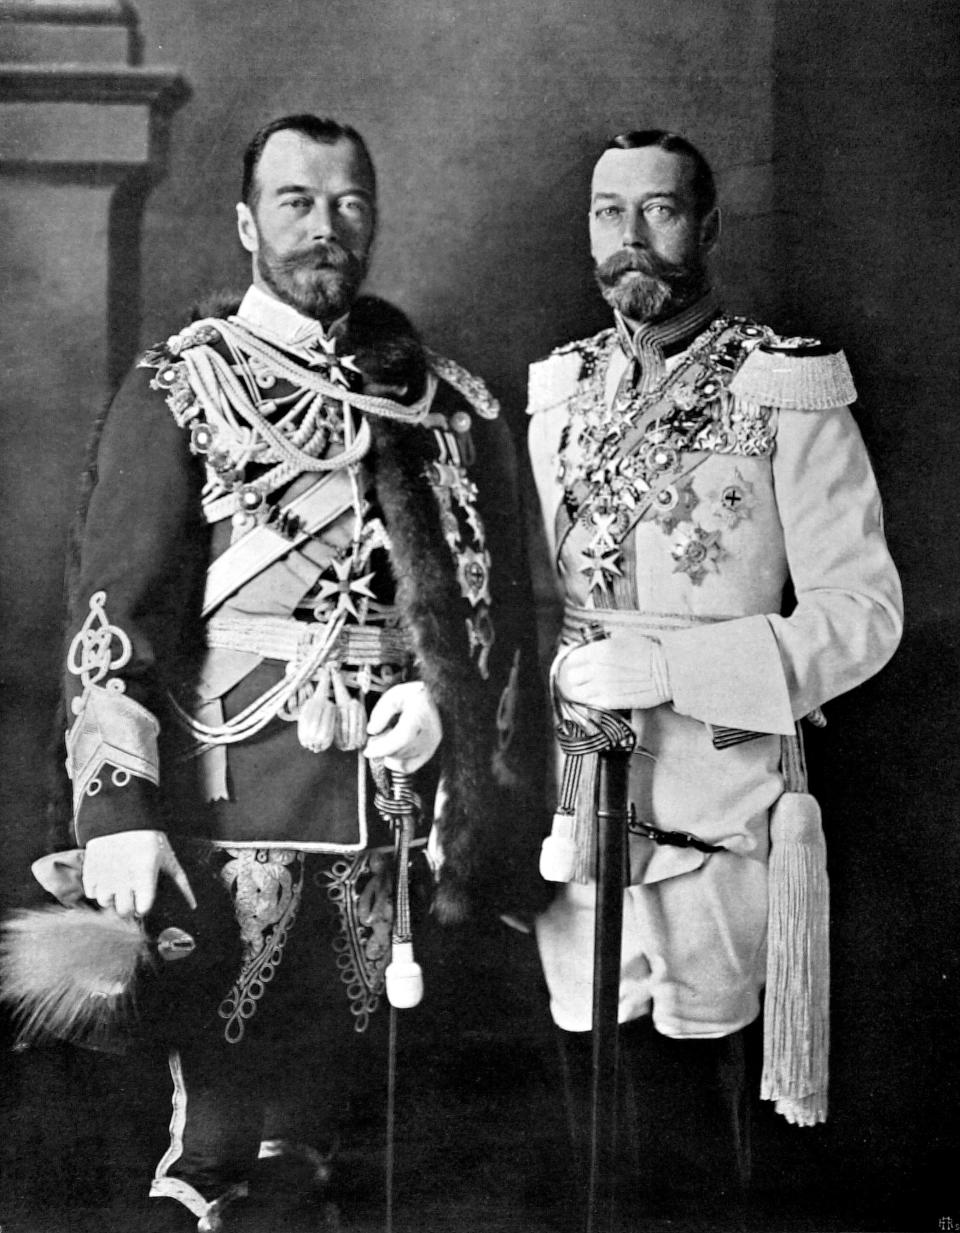 Nicholas II, Emperor of Russia, and George V, King of Great Britain and Ireland in 1913.